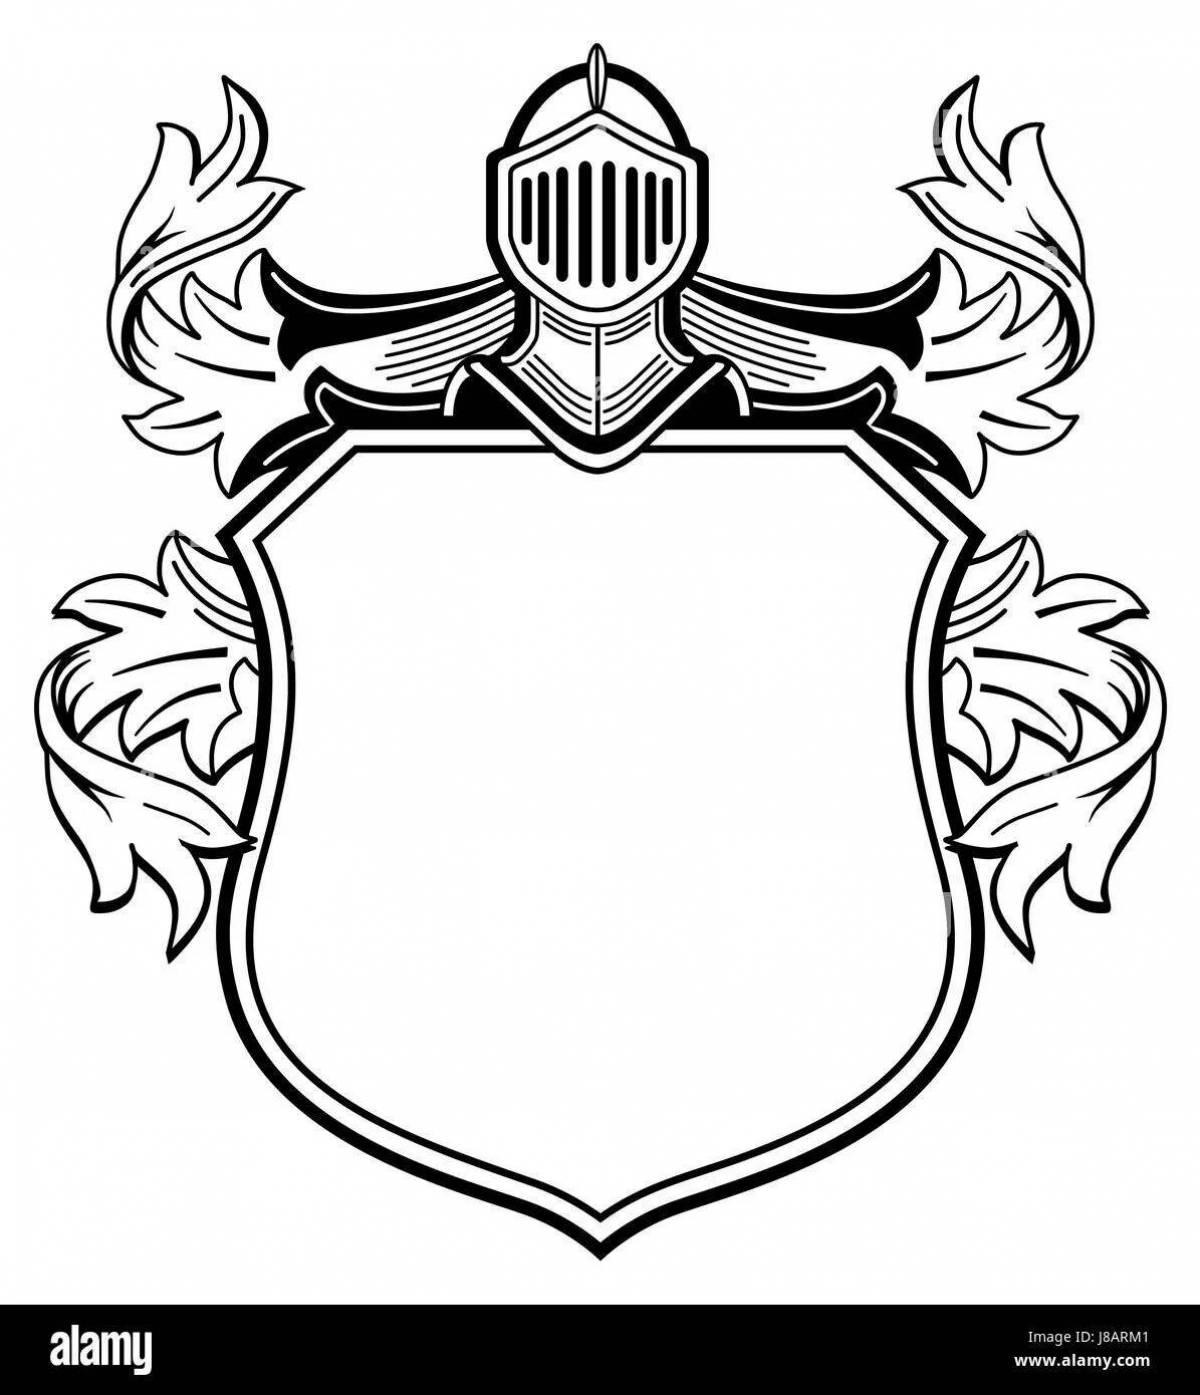 Large coloring of the knight's coat of arms